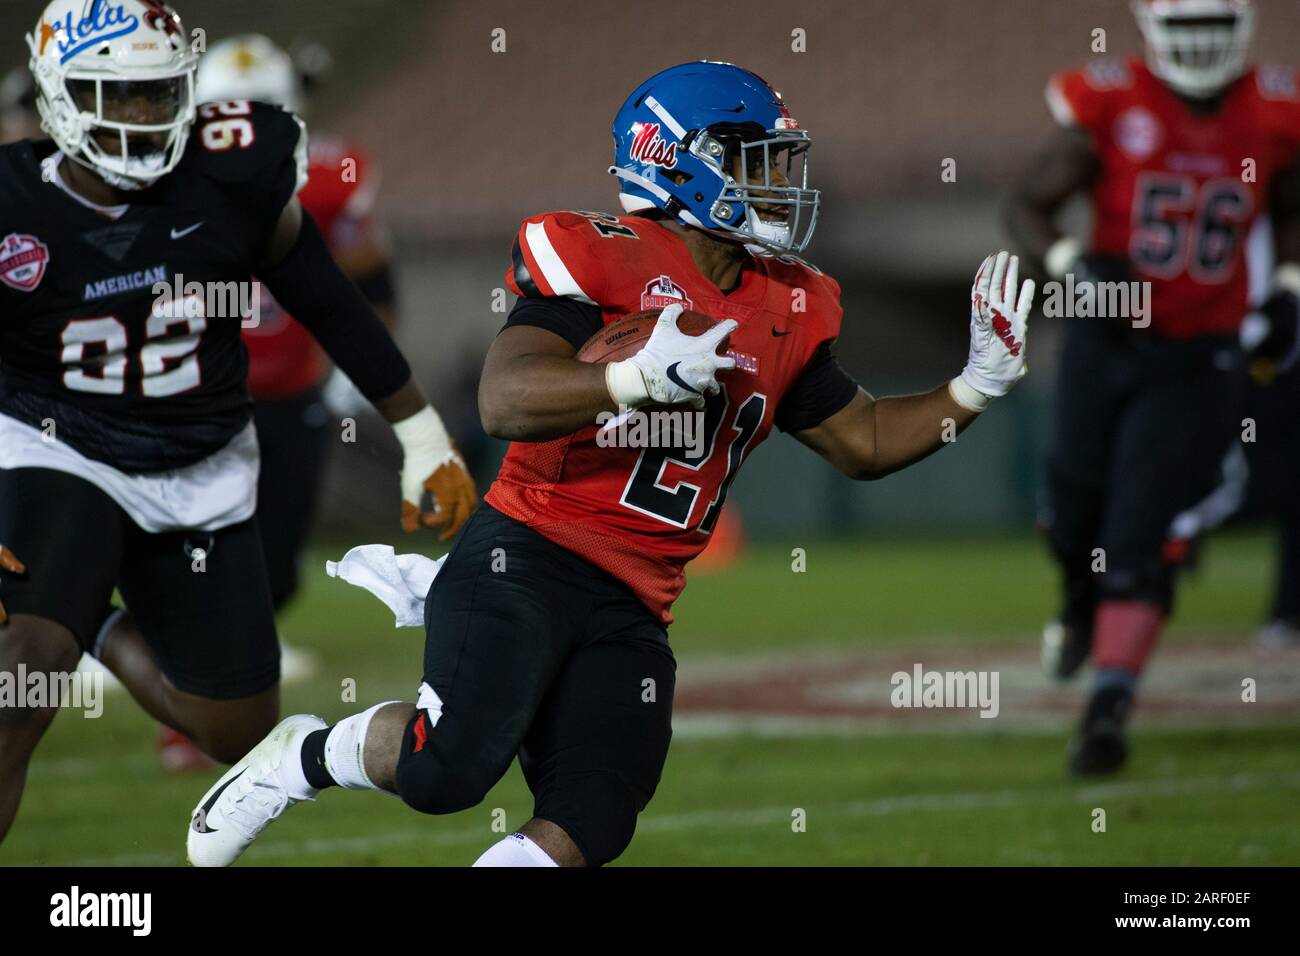 National team running back Scott Phillips (21) of  Mississippi runs the ball during the NFLPA Collegiate Bowl against the American team, Saturday, Jan. 18, 2020 at the Rose Bowl in Pasadena, California. (Photo by IOS/ESPA-Images) Stock Photo